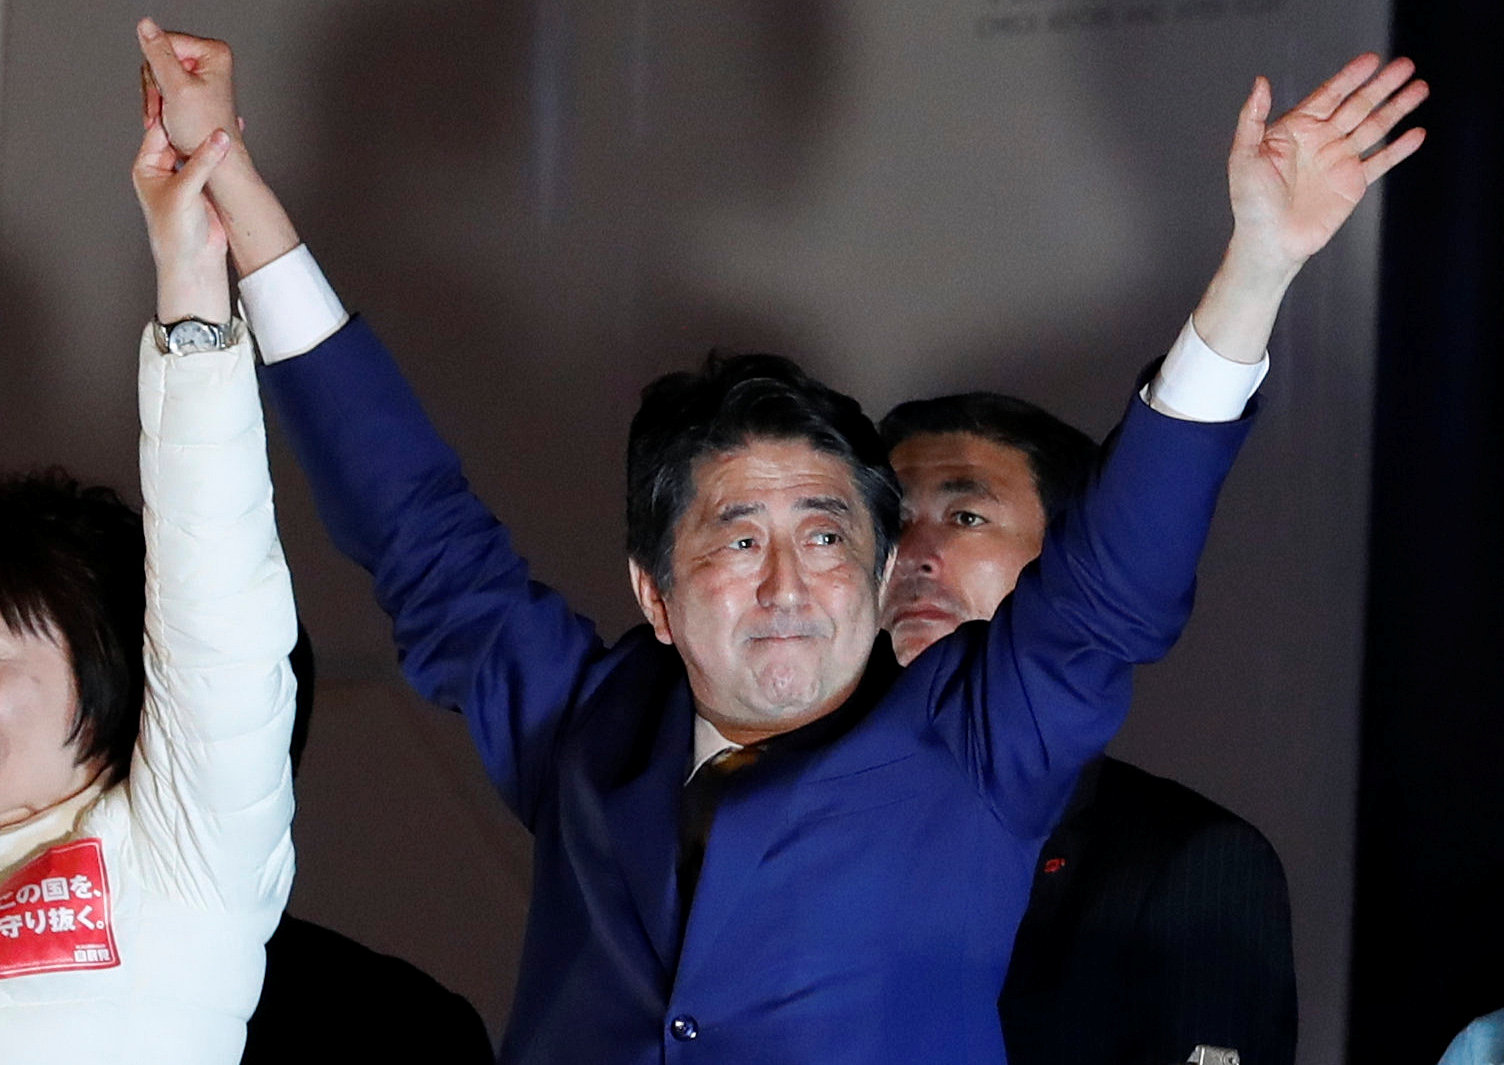 In pictures: Japan votes, Shinzo Abe's gamble on snap poll pay offs